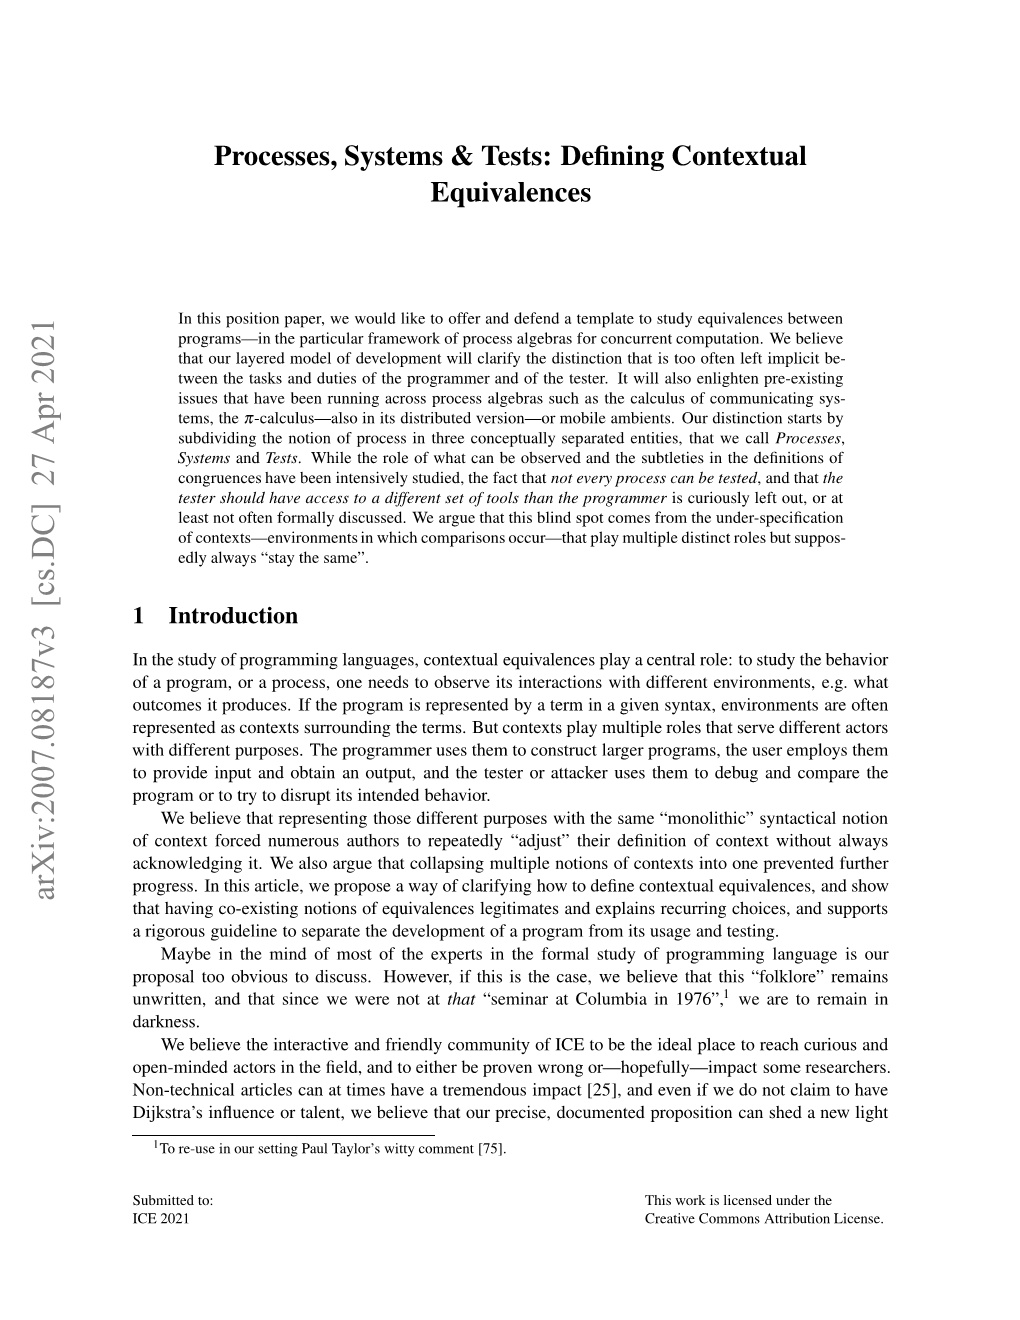 Processes, Systems & Tests: Defining Contextual Equivalences